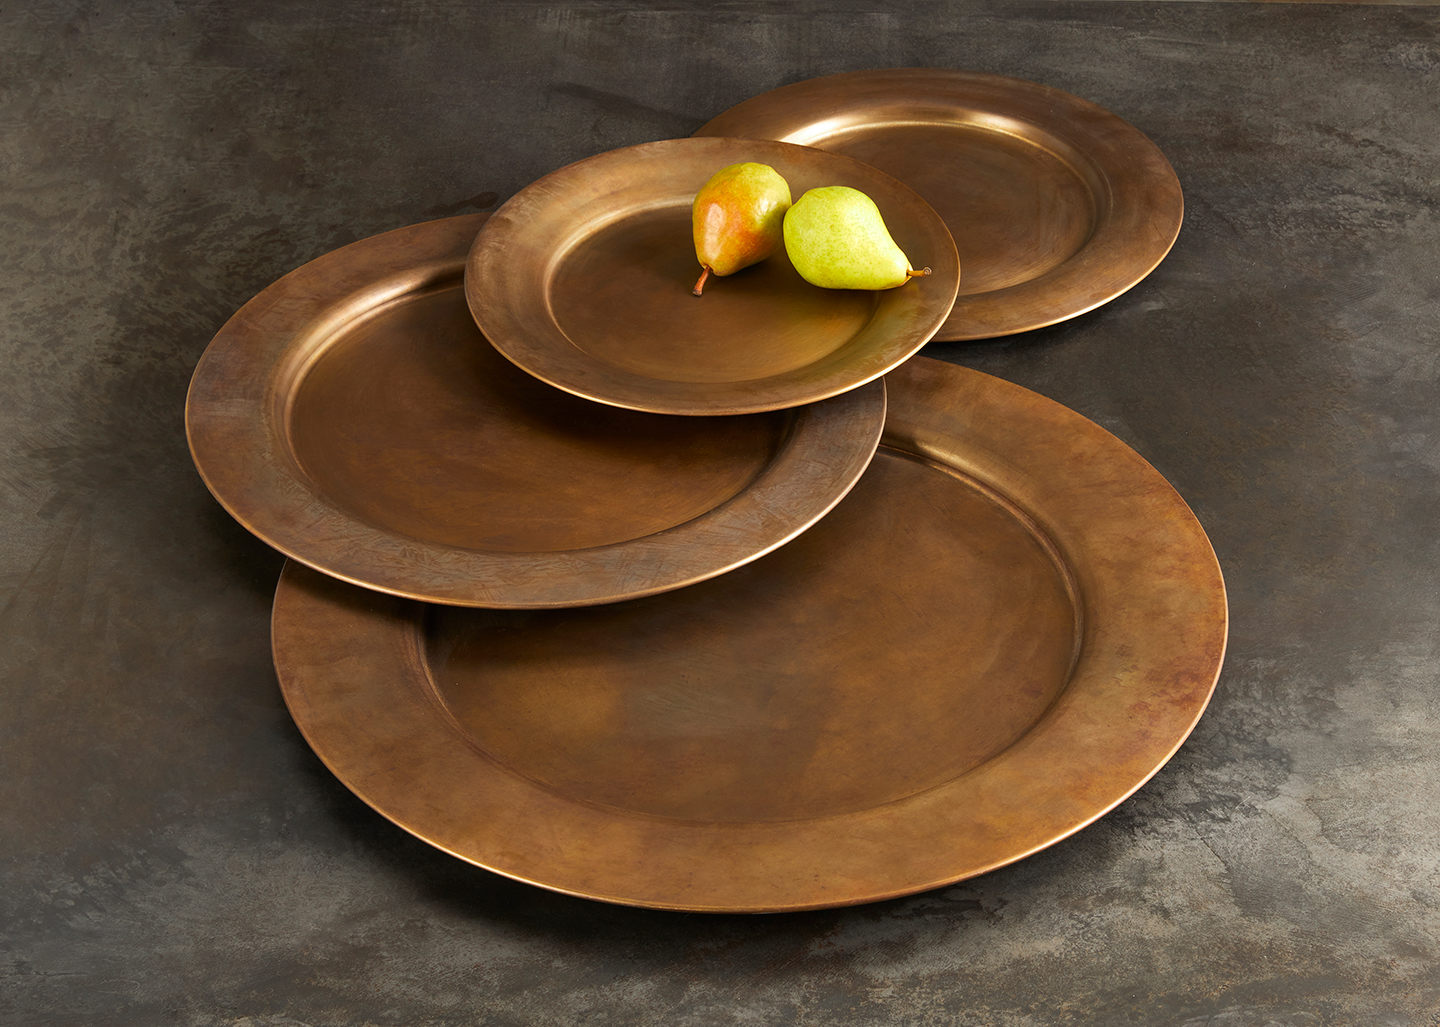 Elevate your room with these modern home decor accents, beautiful brass platters made with the best quality brass and finished with our Signature Evolving Patina. Use these pieces to serve cocktails or as a centrepiece base on a coffee or dining table. For sale at Studio Sturdy and created by Martha Sturdy